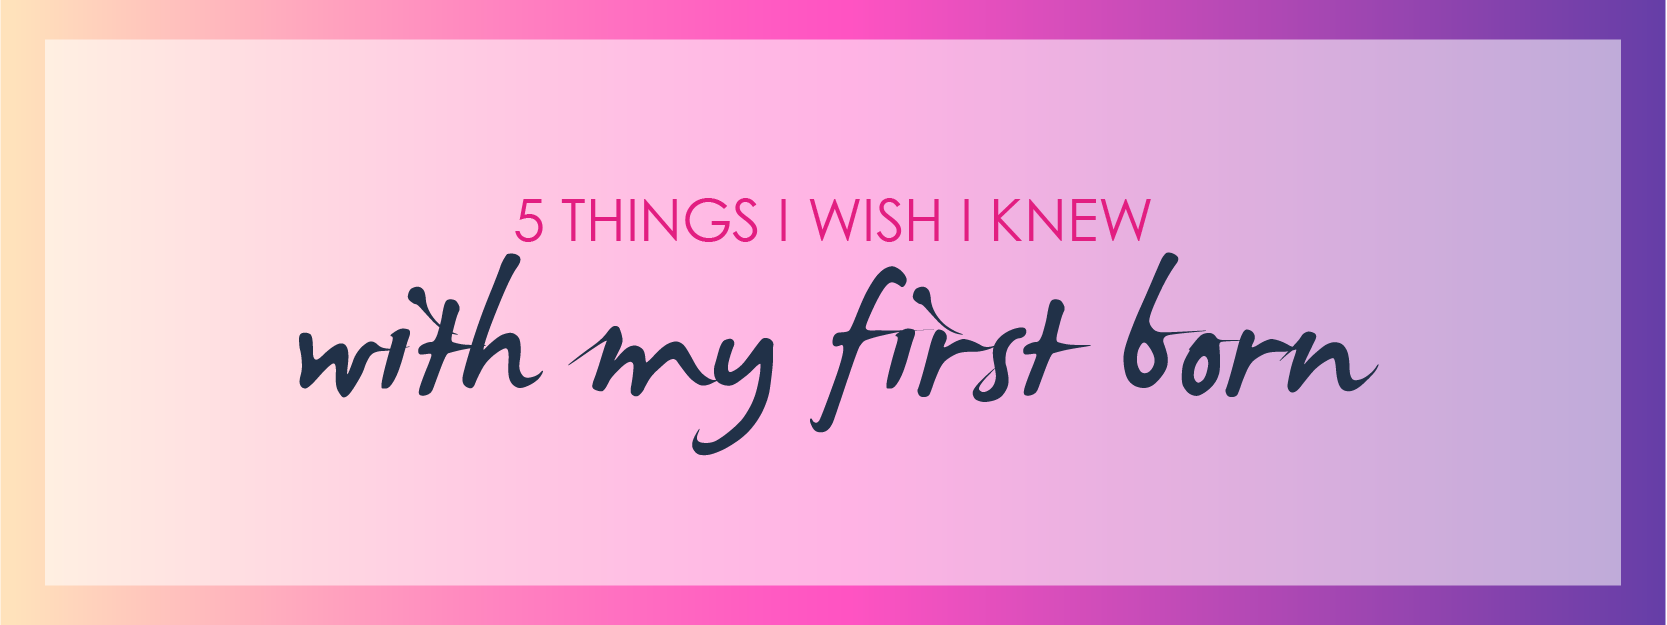 5 Things I wish I knew with my Firstborn